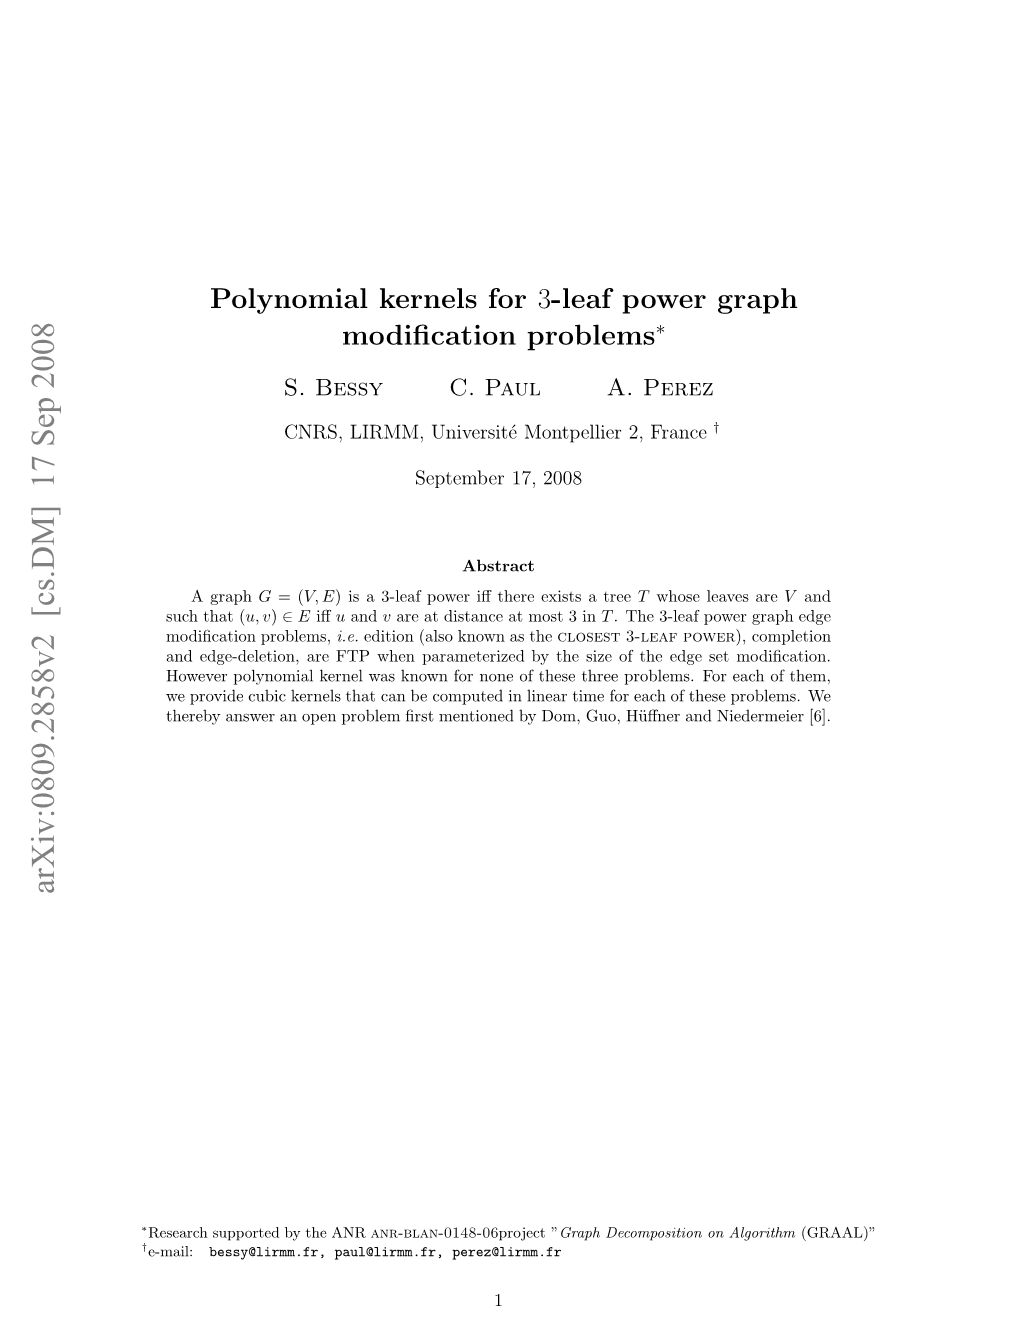 Polynomial Kernels for 3-Leaf Power Graph Modification Problems